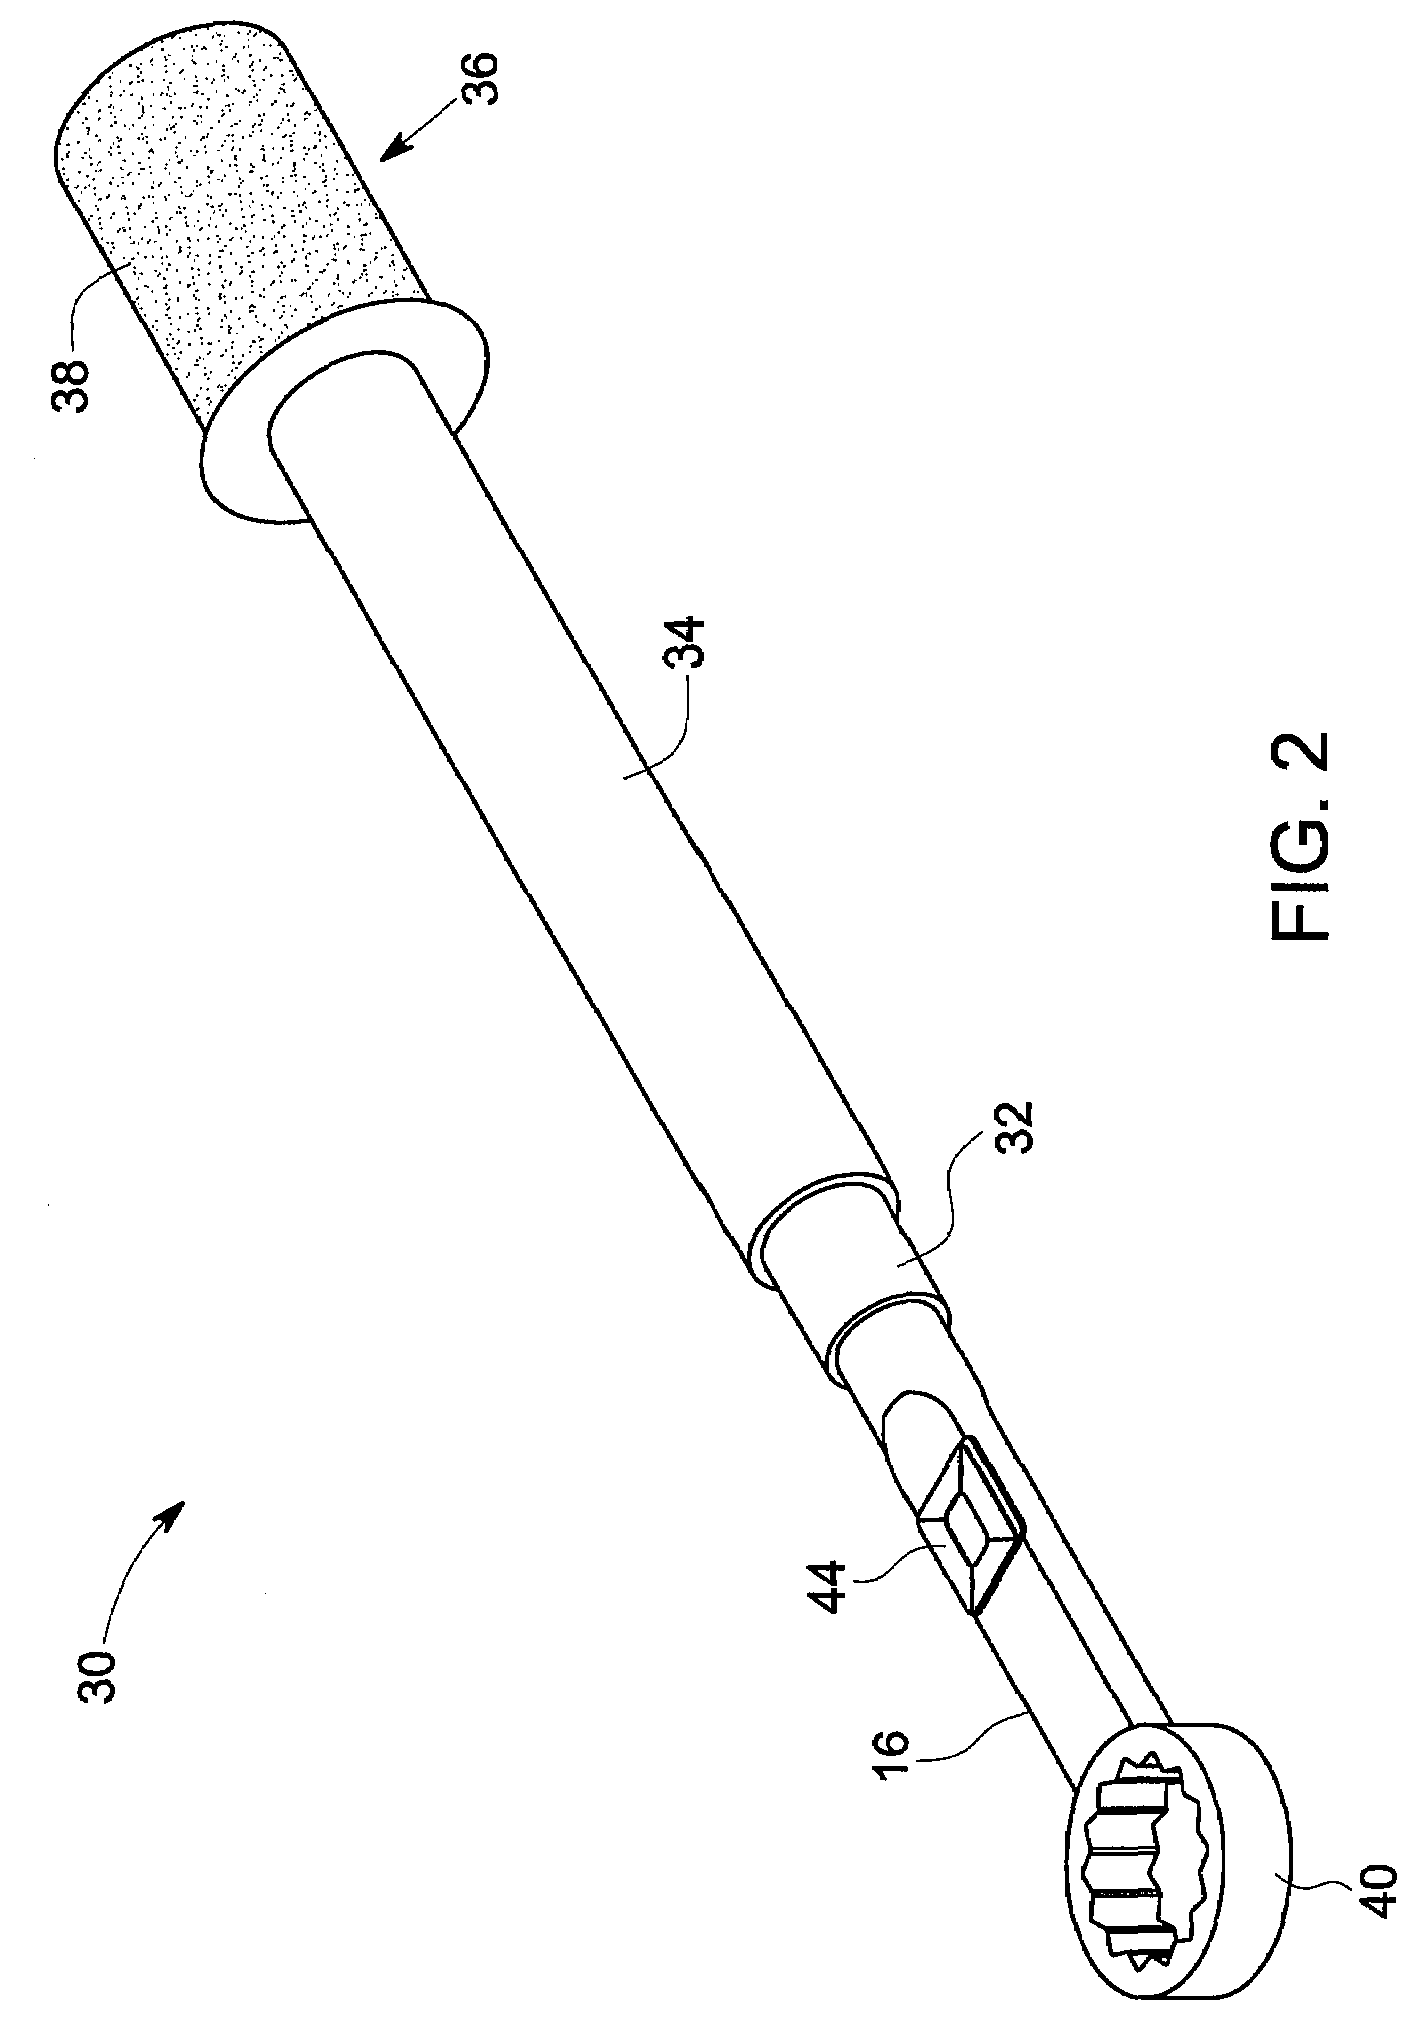 Wireless-enabled tightening system for fasteners and a method of operating the same